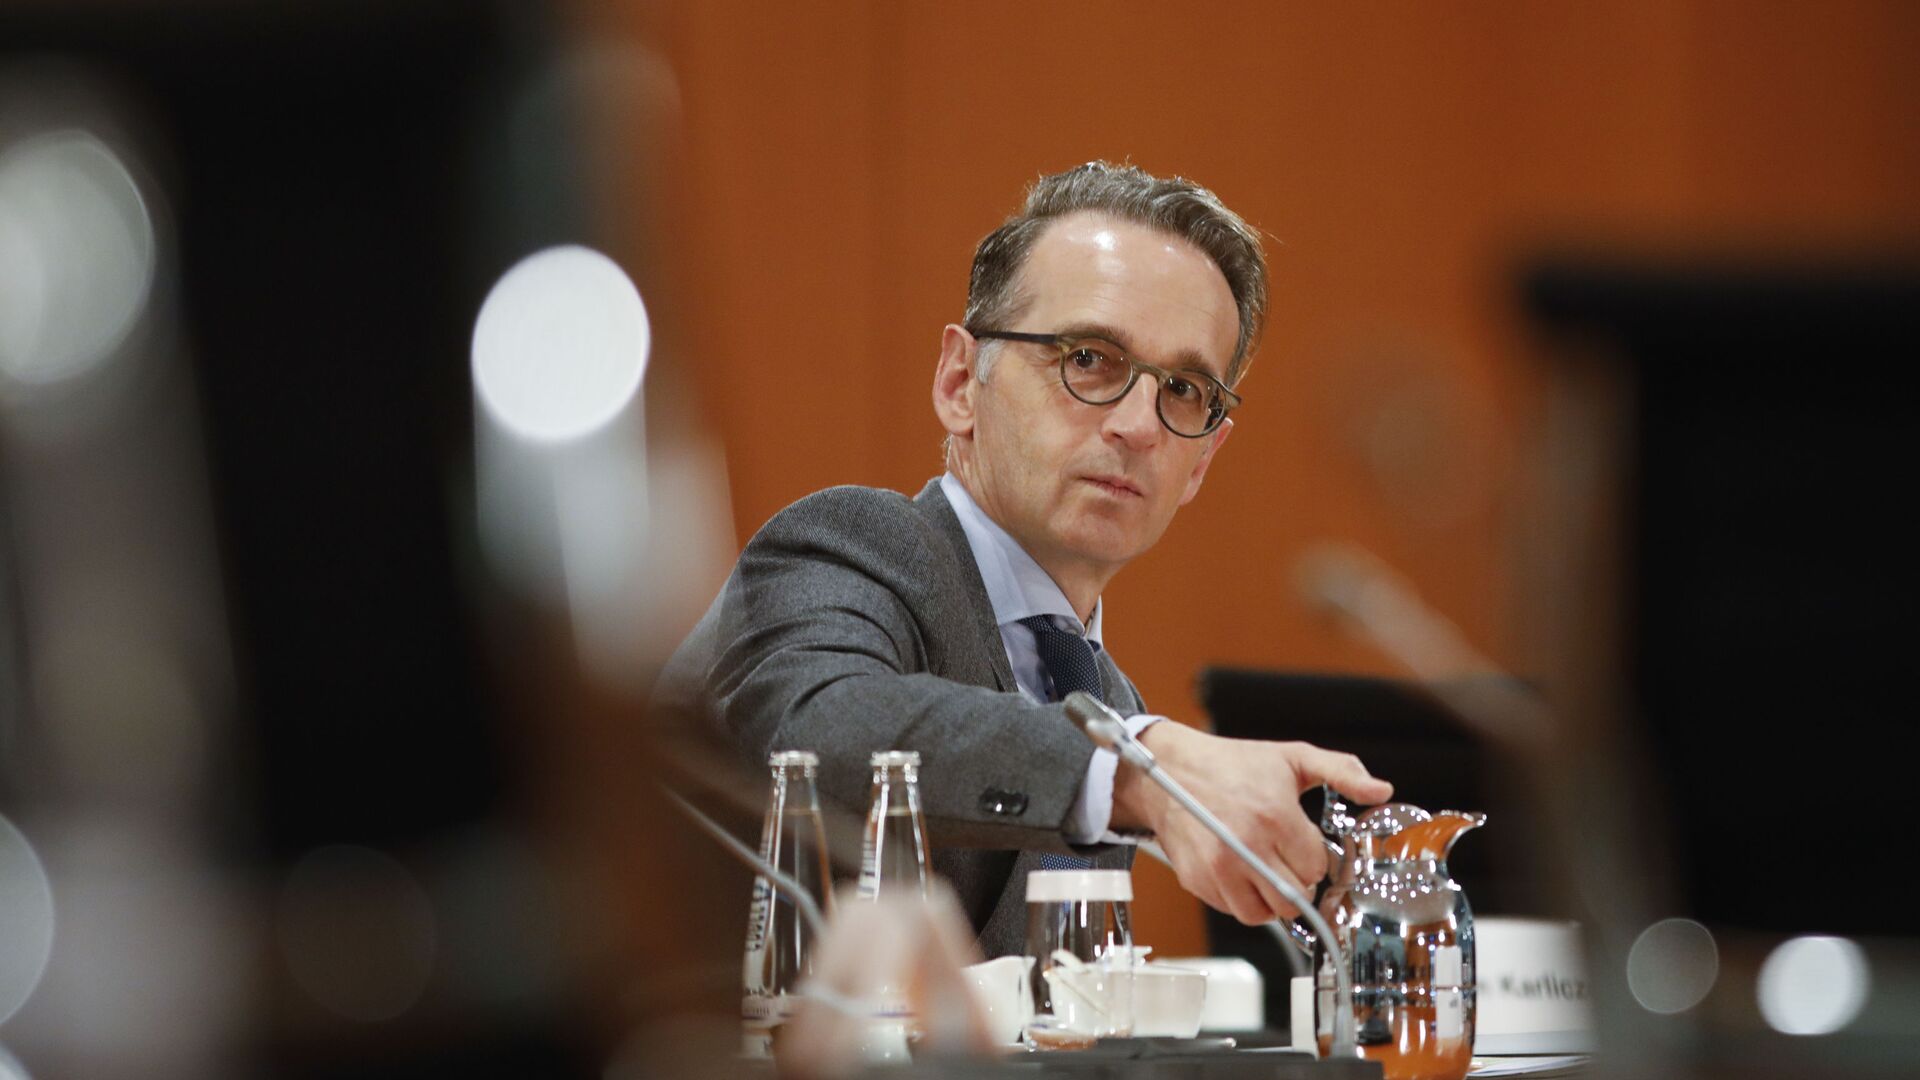 German Foreign Minister Heiko Maas attends the weekly cabinet meeting of the German government at the chancellery in Berlin, Germany, Wednesday, Oct. 7, 2020 - Sputnik International, 1920, 31.08.2021